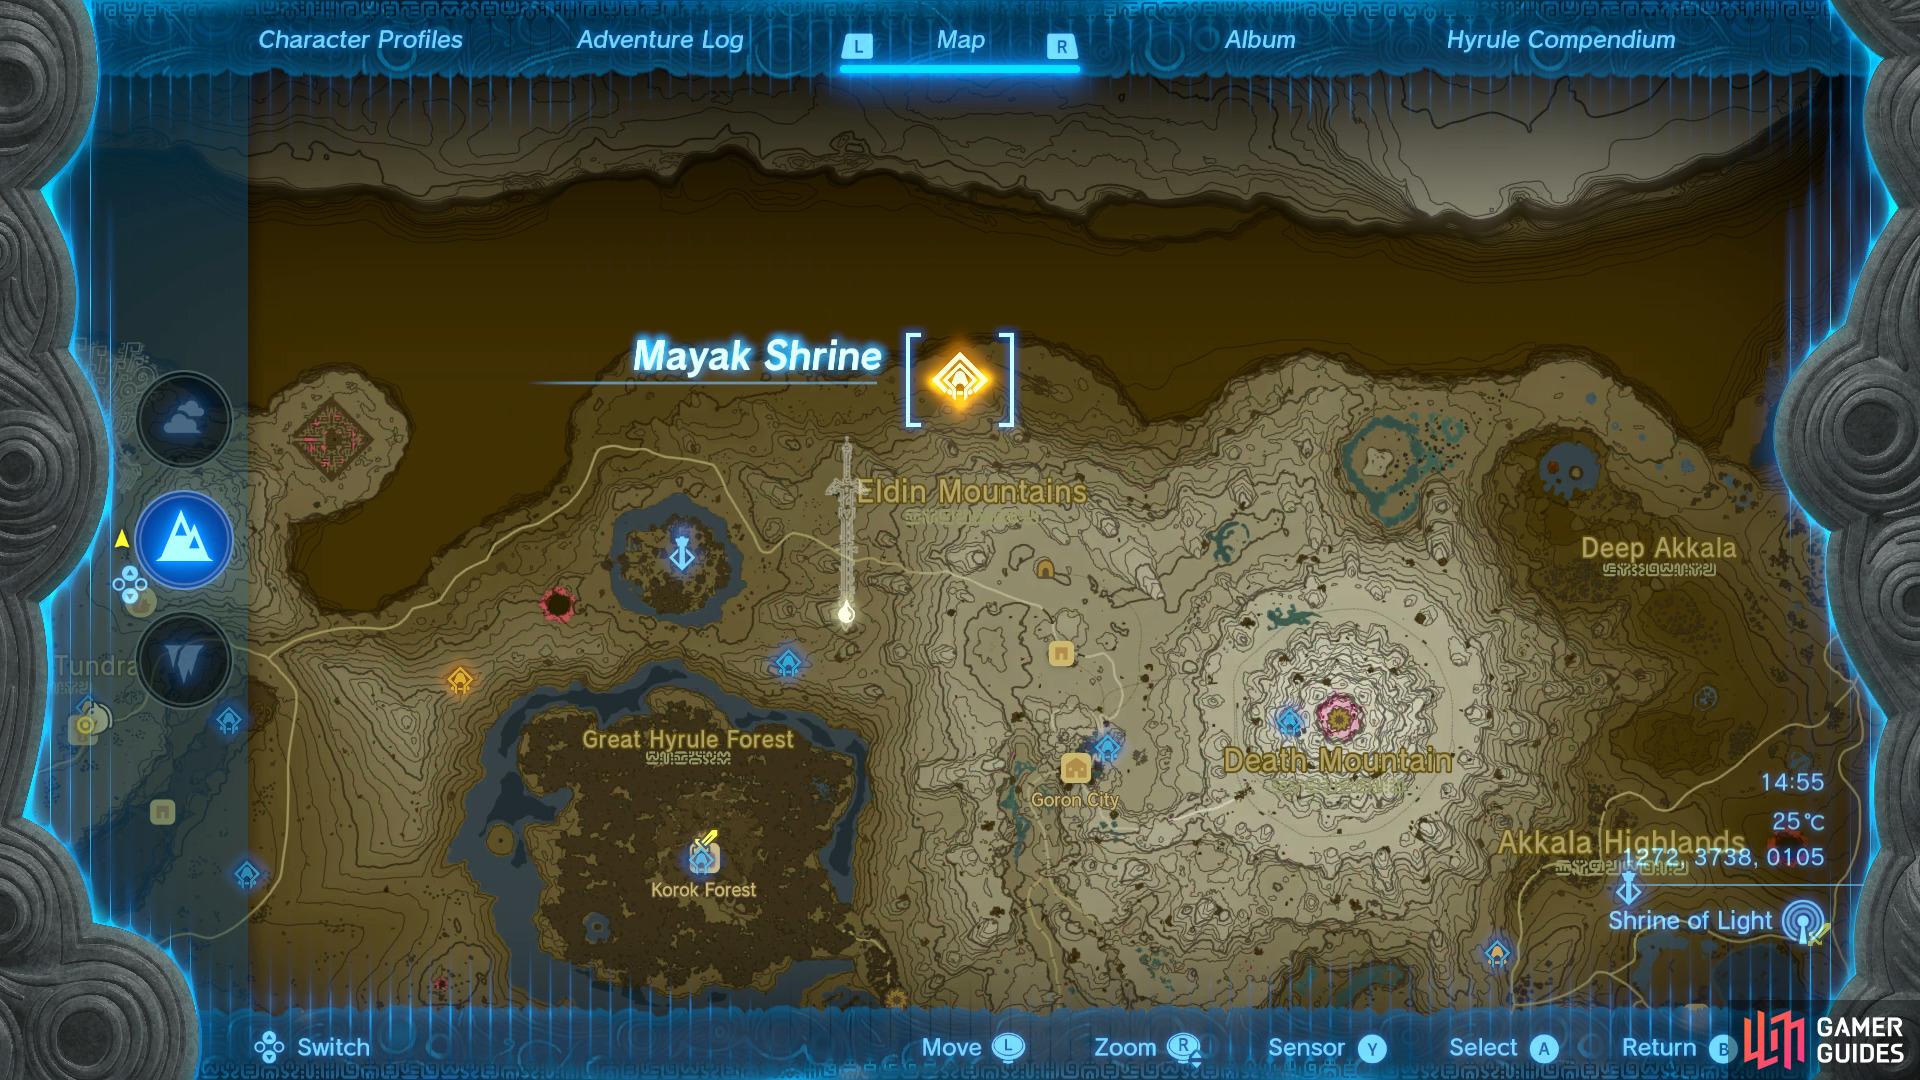 Head to this location on the map to find the Mayak Shrine entrance.